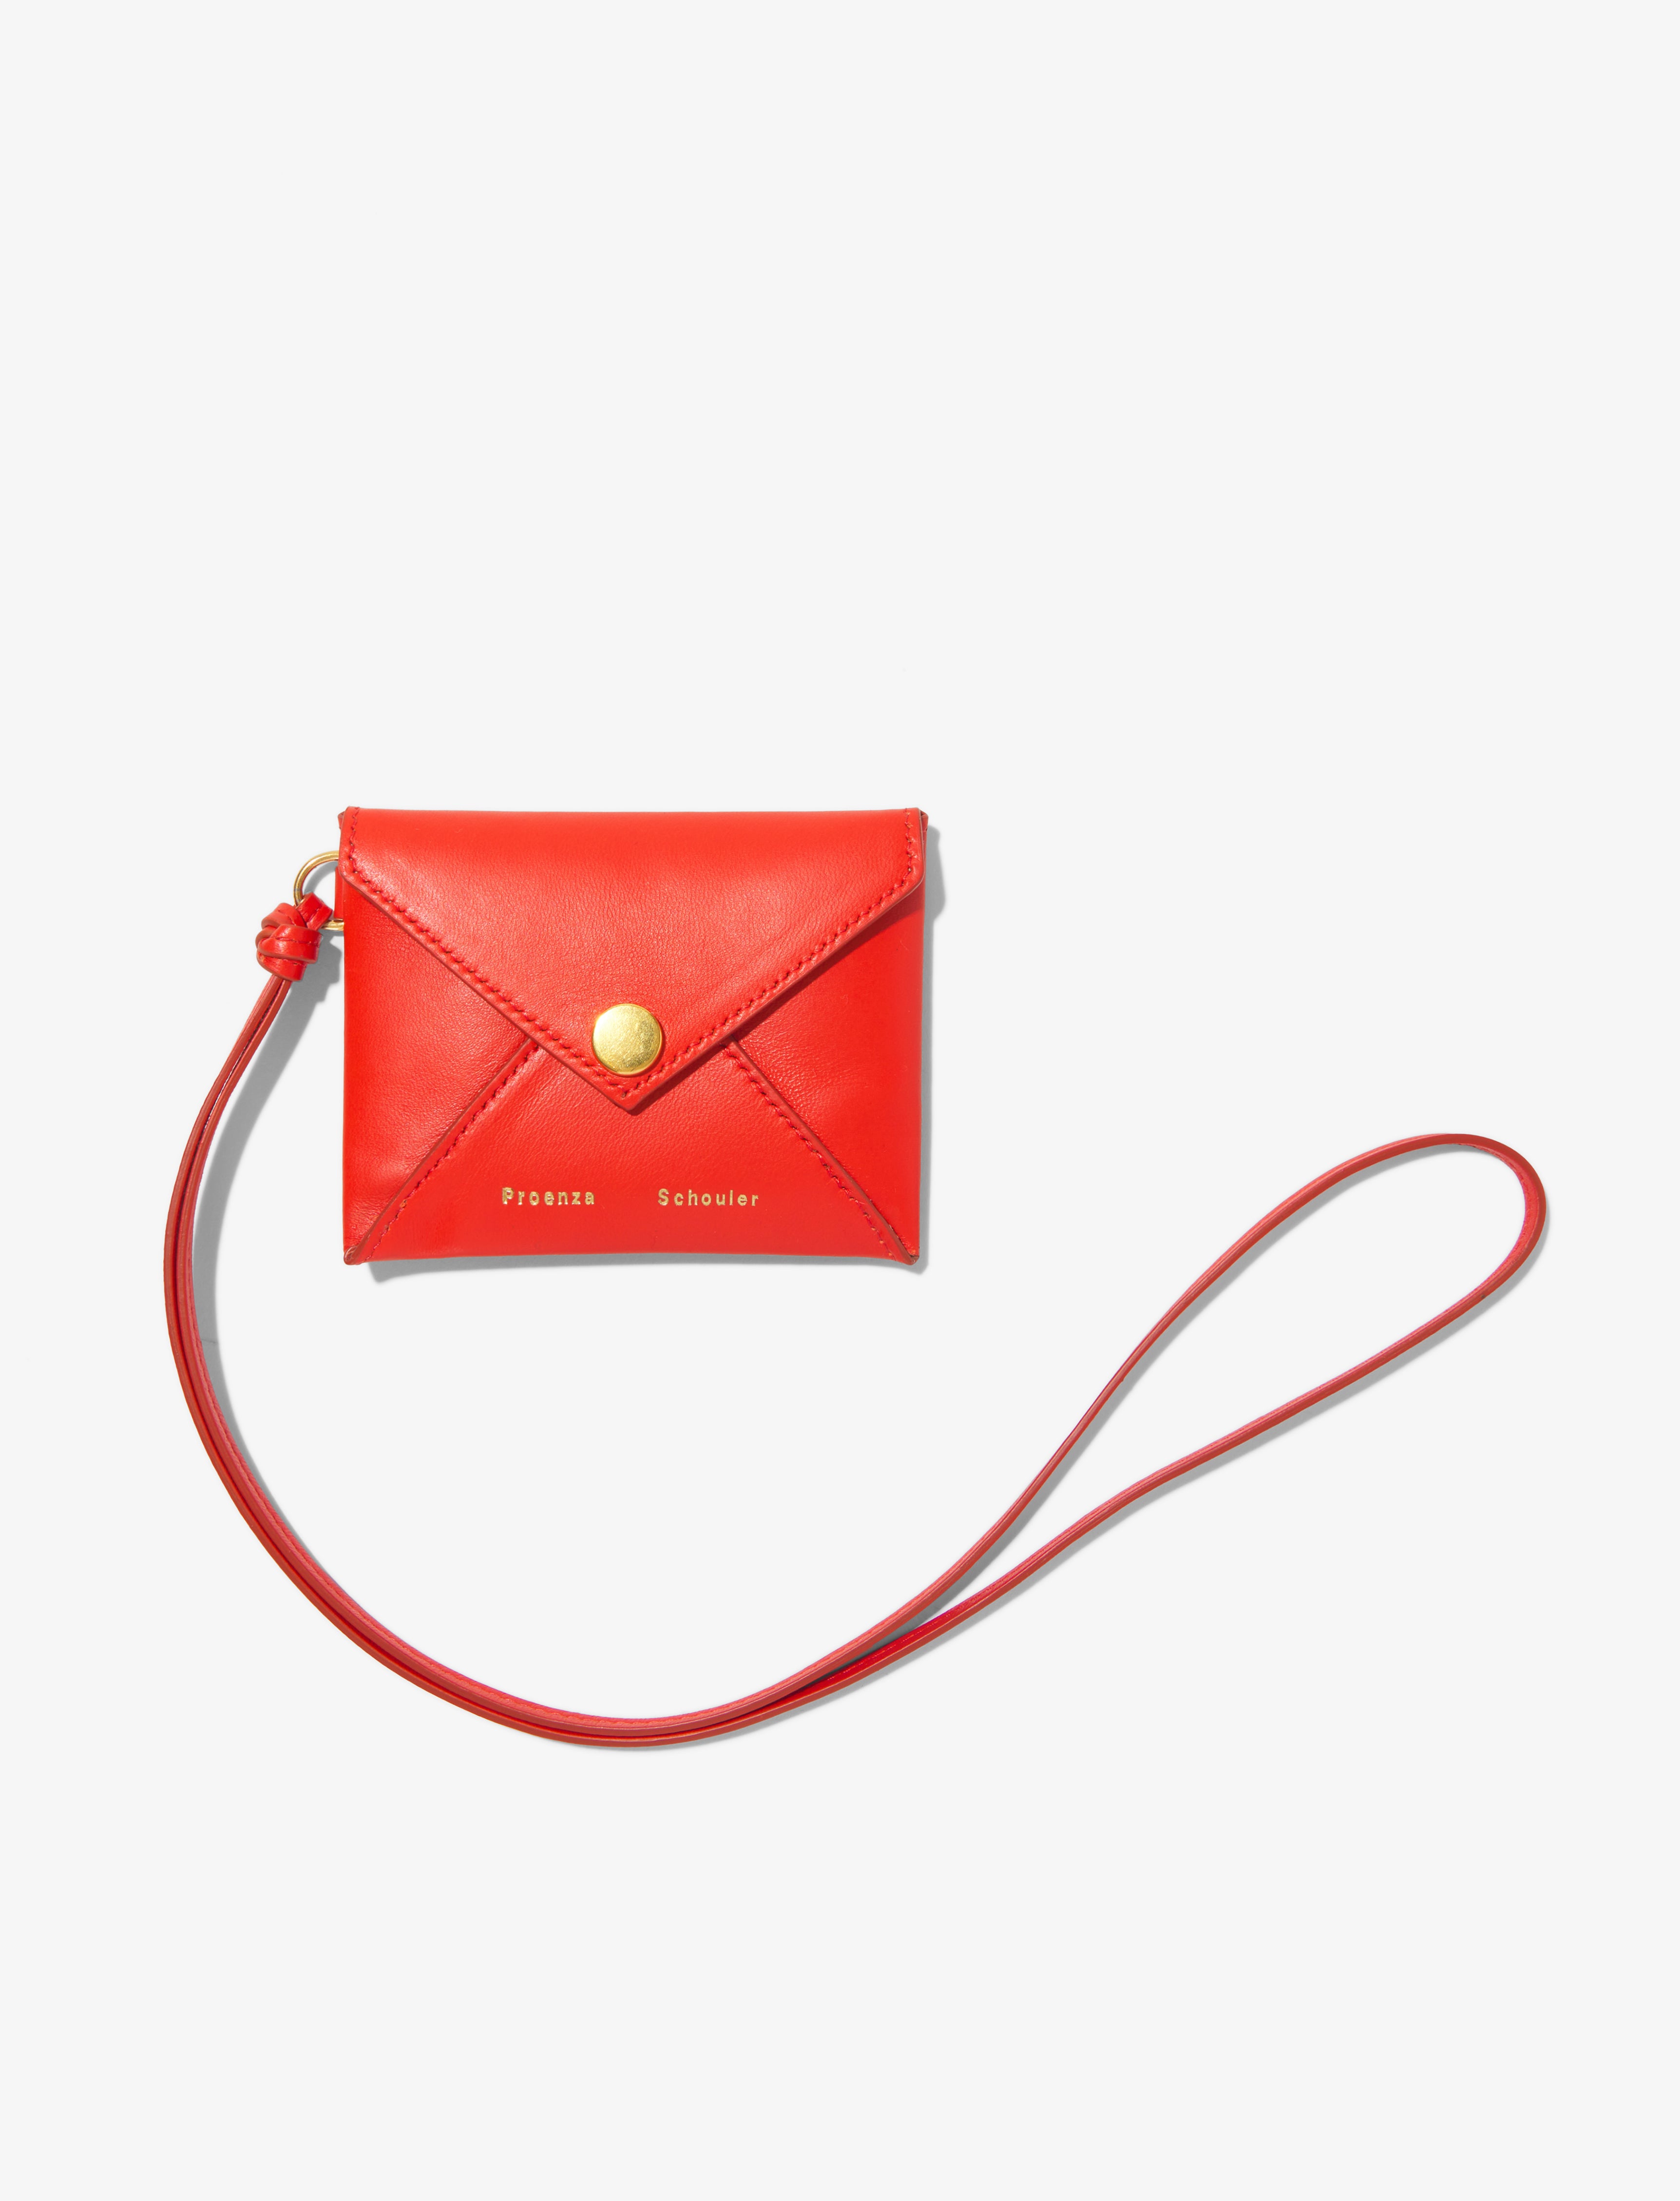 Shop Wallets, Keychains, and Small Leather Goods | Proenza 